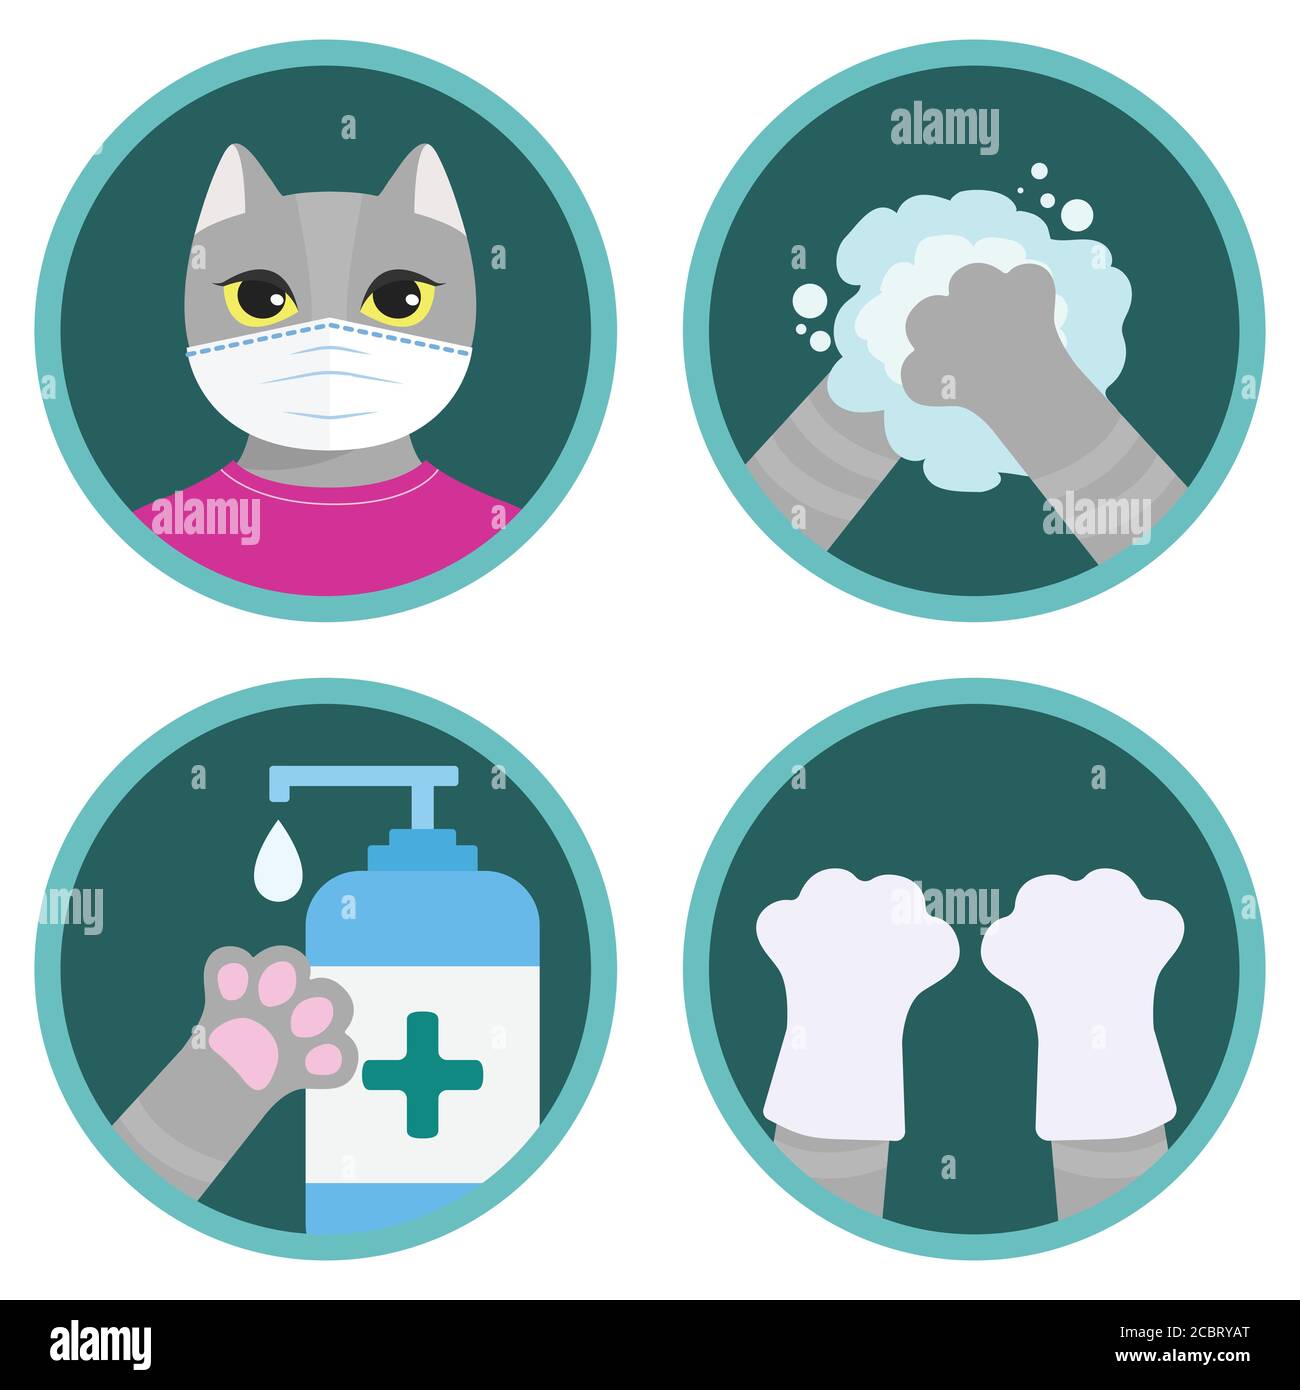 COVID-19 safety measures illustrated by cute cartoon cat. Icons set: wear a mask, wash hands, use sanitizer, wear gloves. Funny instruction for kids Stock Vector